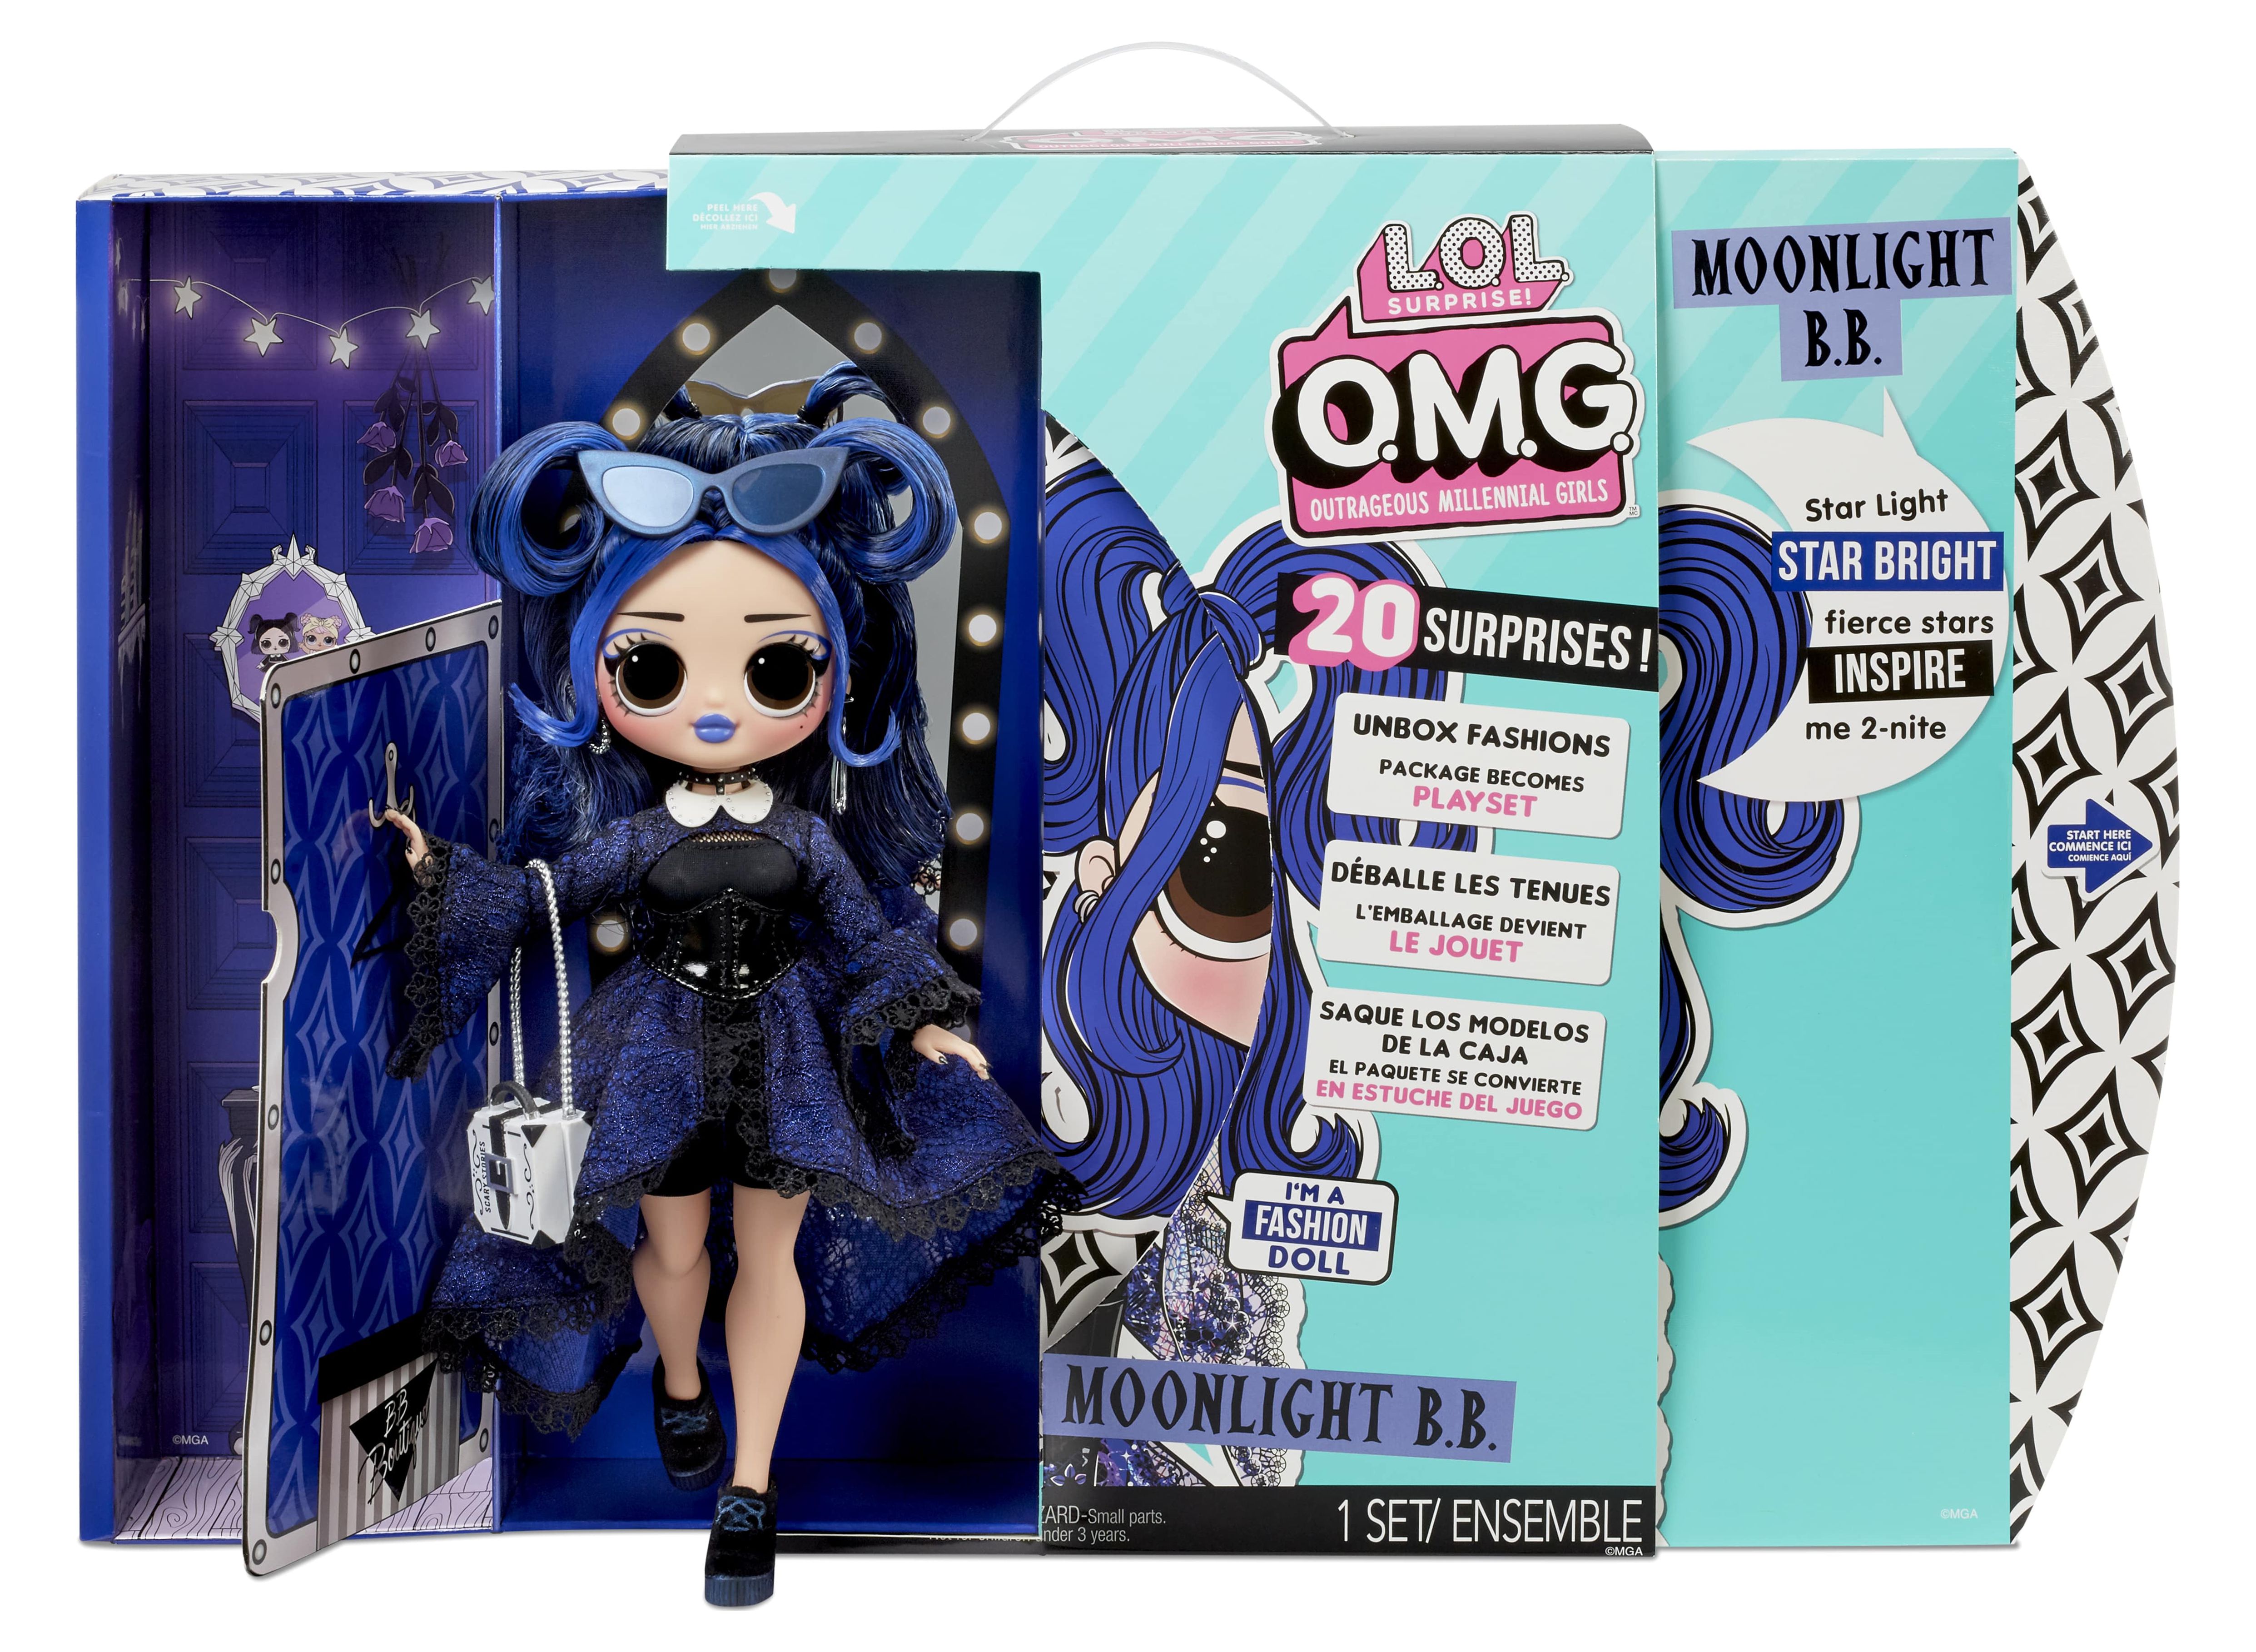 LOL Surprise Omg Moonlight B.B. Fashion Doll - Dress Up Doll Set With 20 Surprises for Girls And Kids 4+ - image 2 of 7